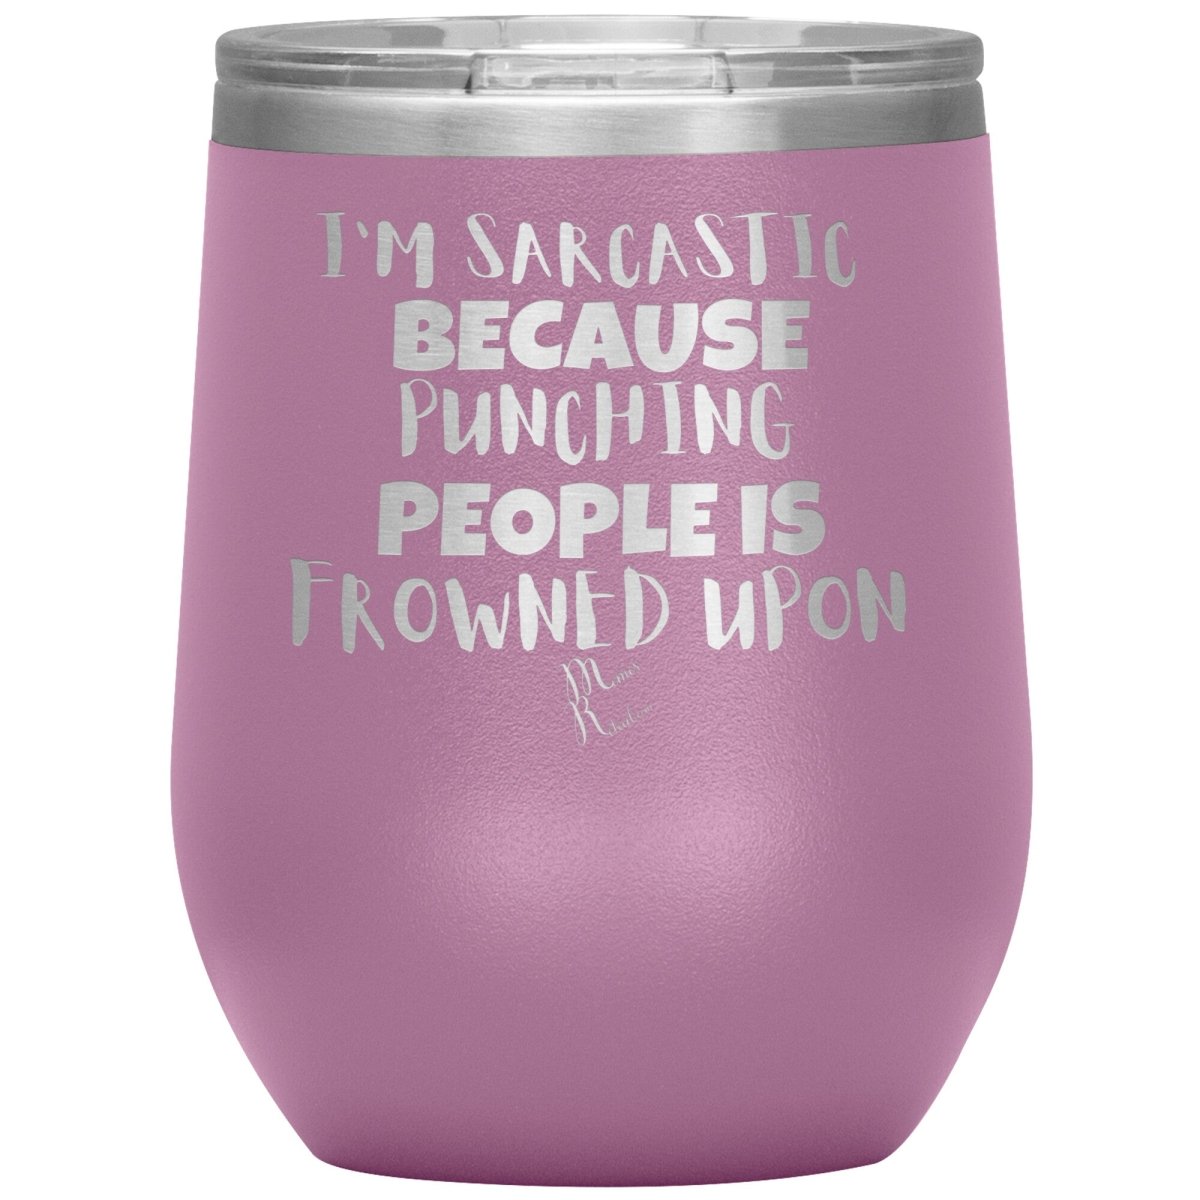 I'm Sarcastic Because Punching People is Frowned Upon Tumblers, 12oz Wine Insulated Tumbler / Light Purple - MemesRetail.com